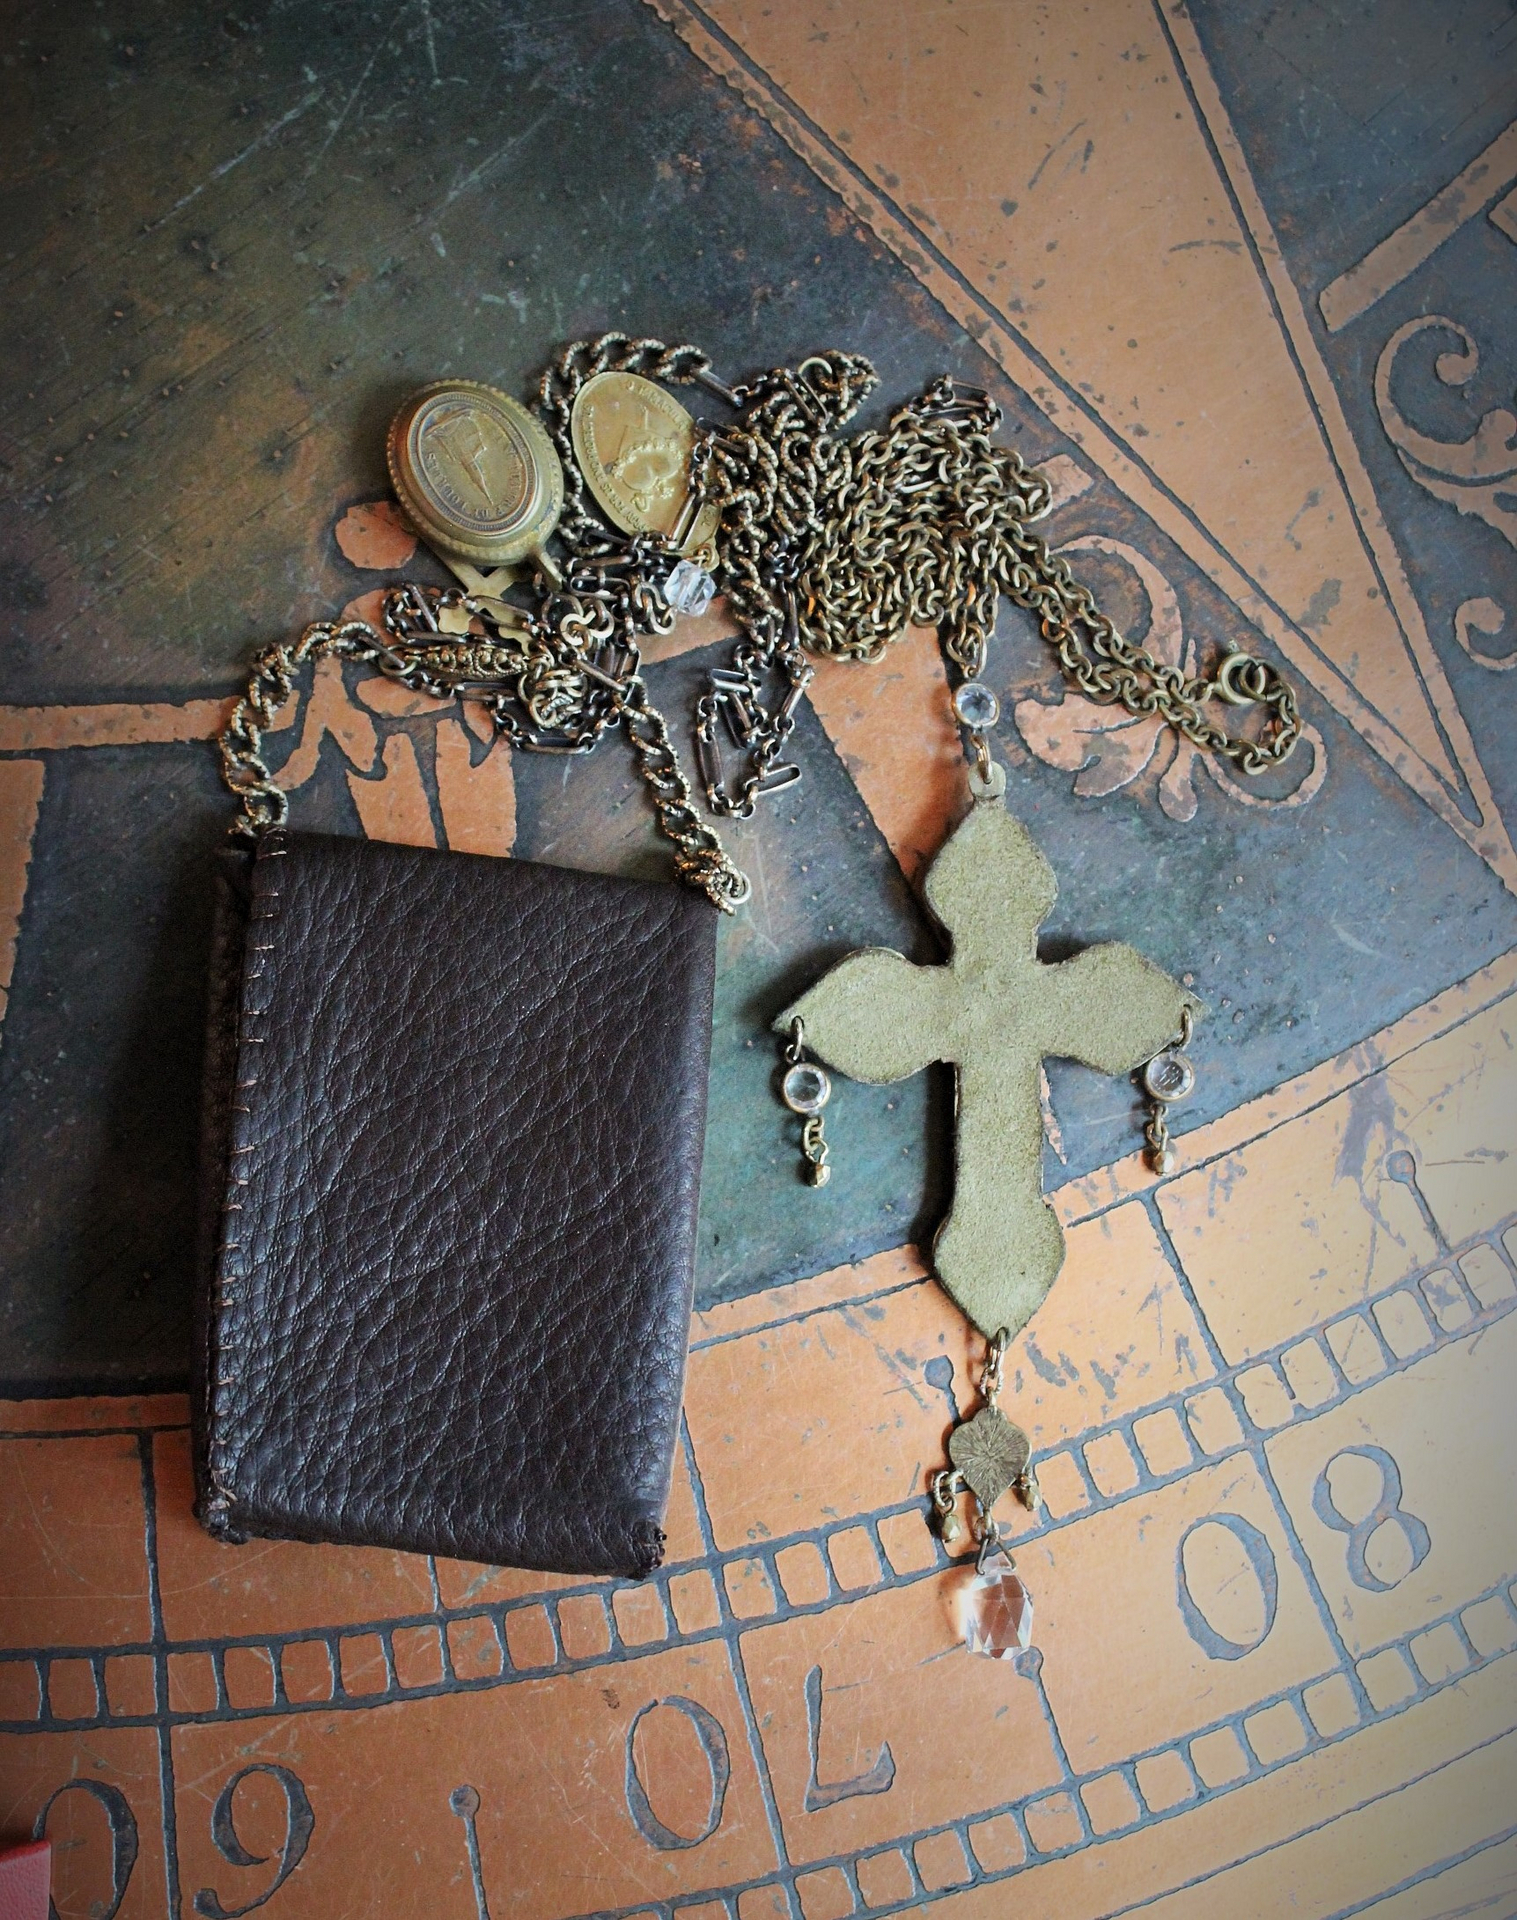 Paradise Lost Necklace Set w/Hand Stitched Distressed Leather Pouch,2 Volume Miniature Paradise Lost (John Milton) Books,Antique French Reliquary Locket,Antique Sacred Heart Cross & More!